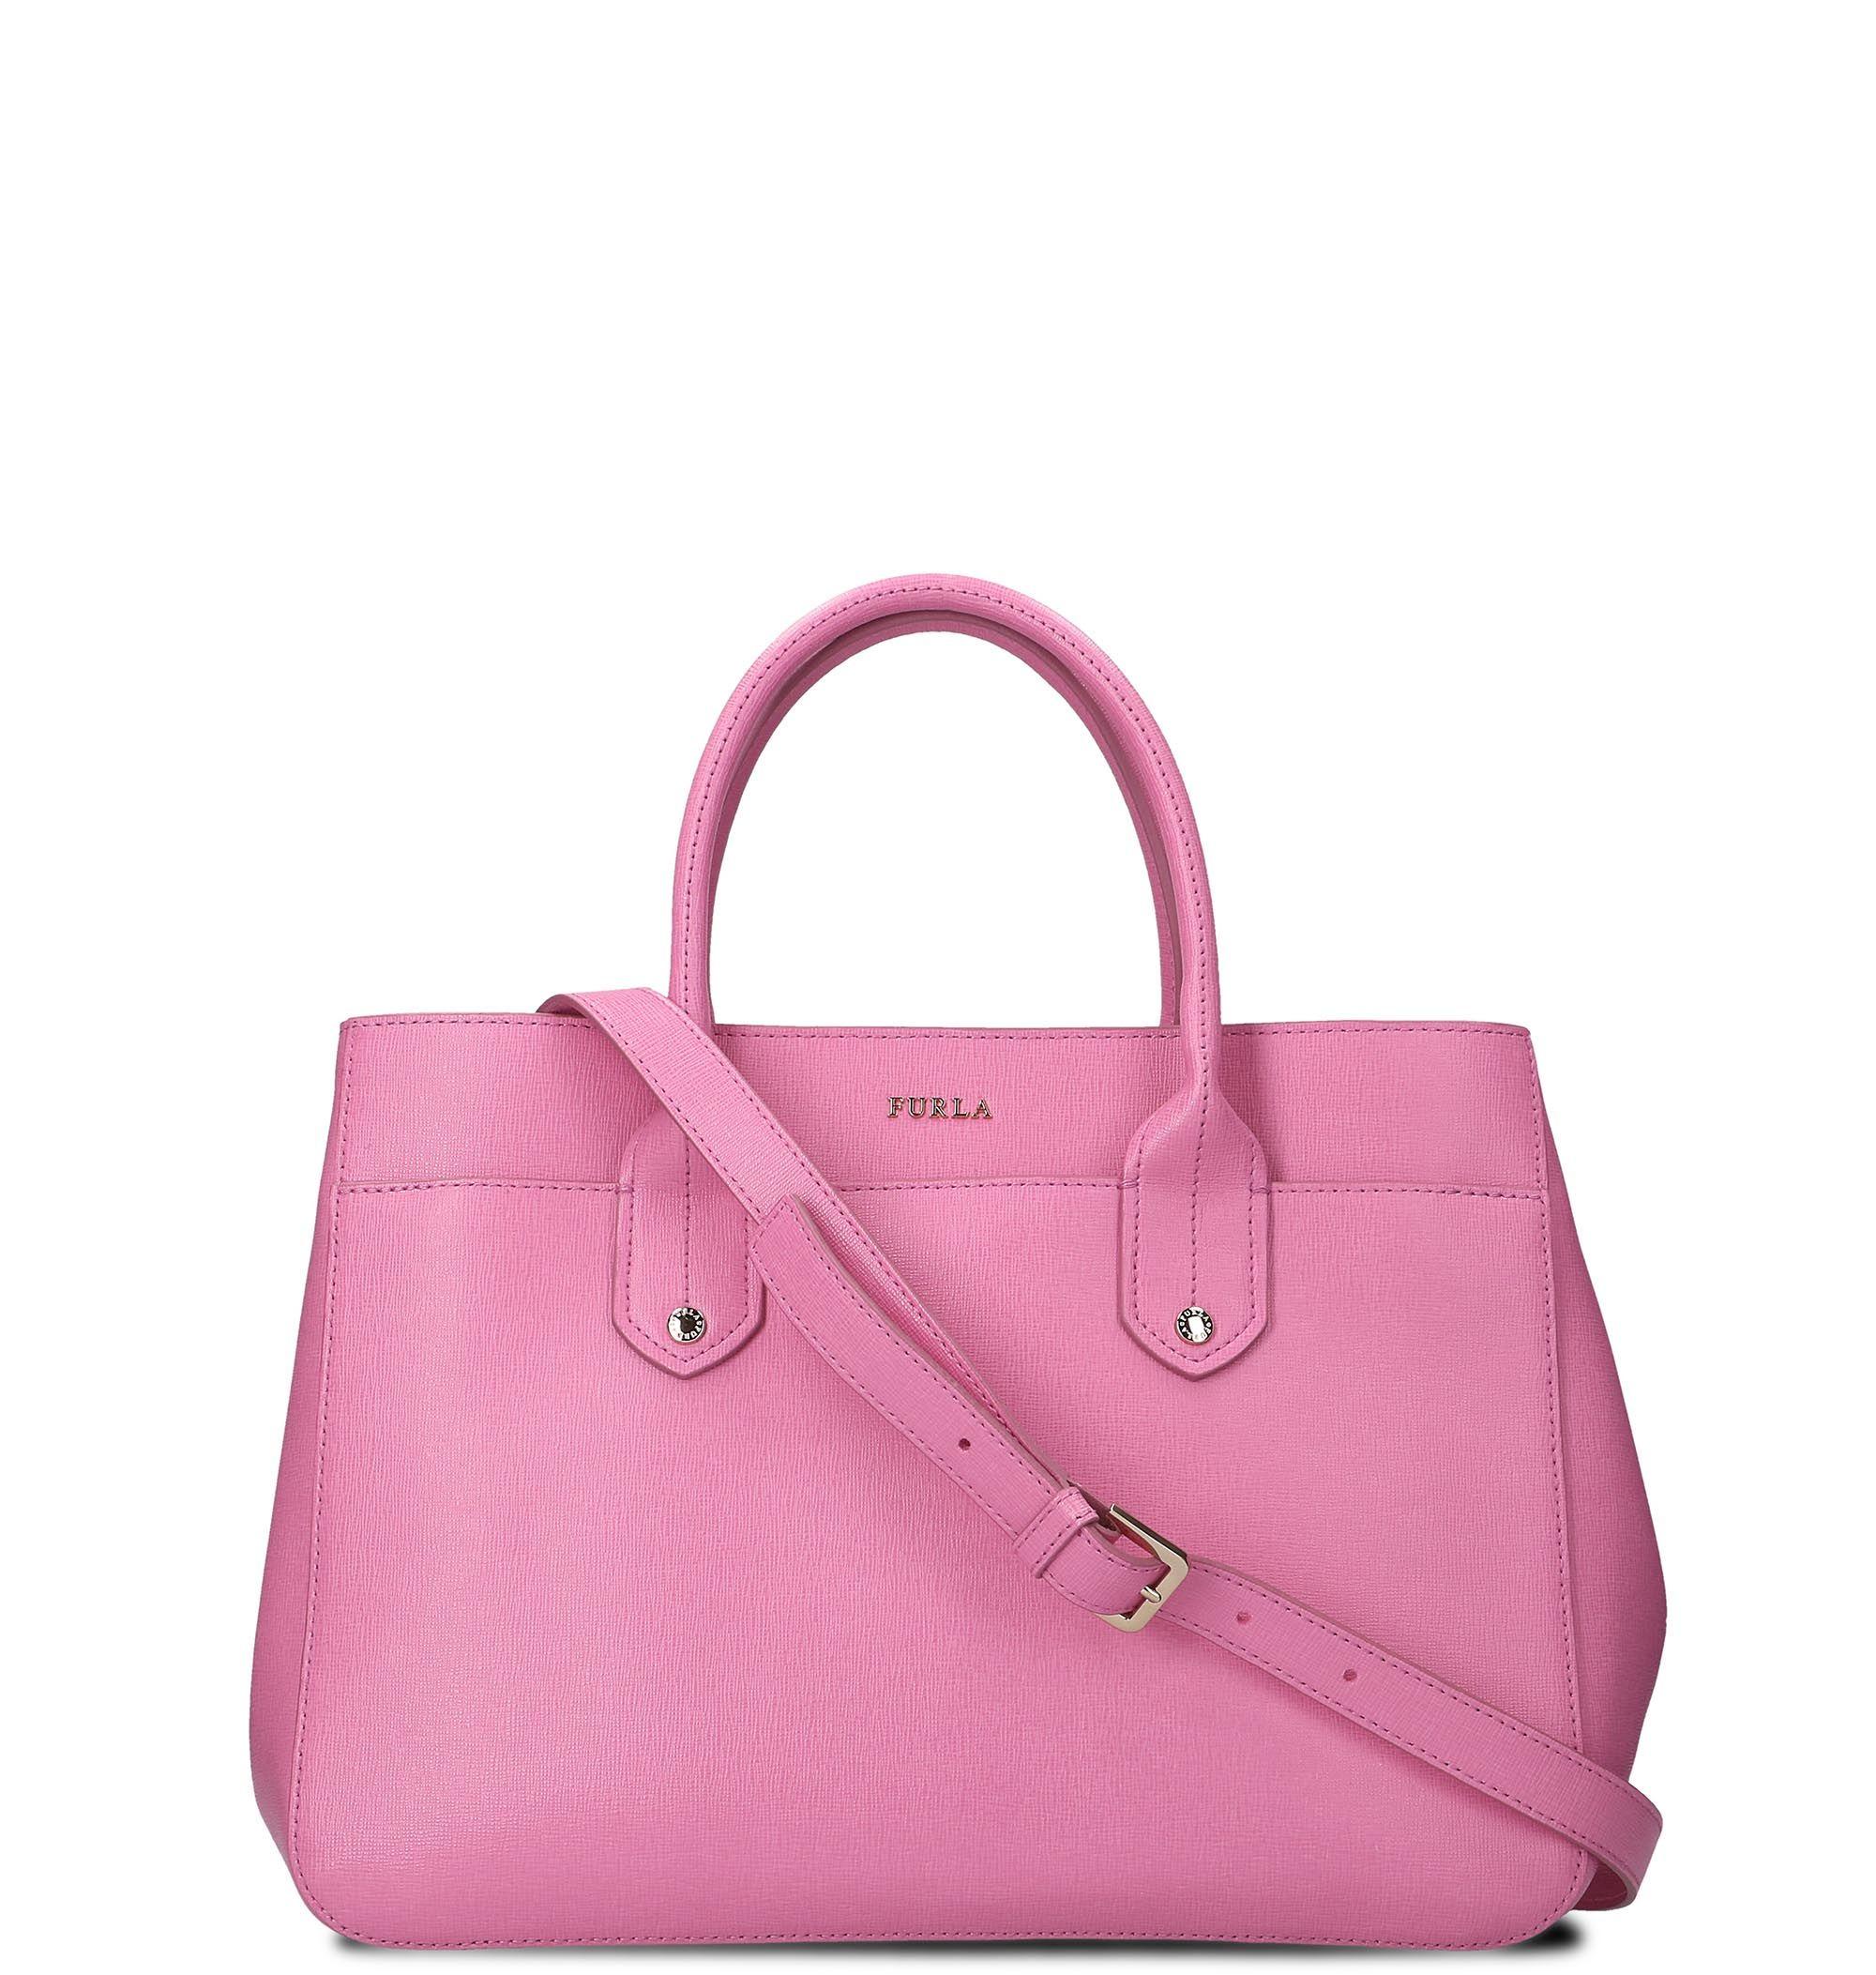 Furla Pink Leather Tote in Pink - Lyst